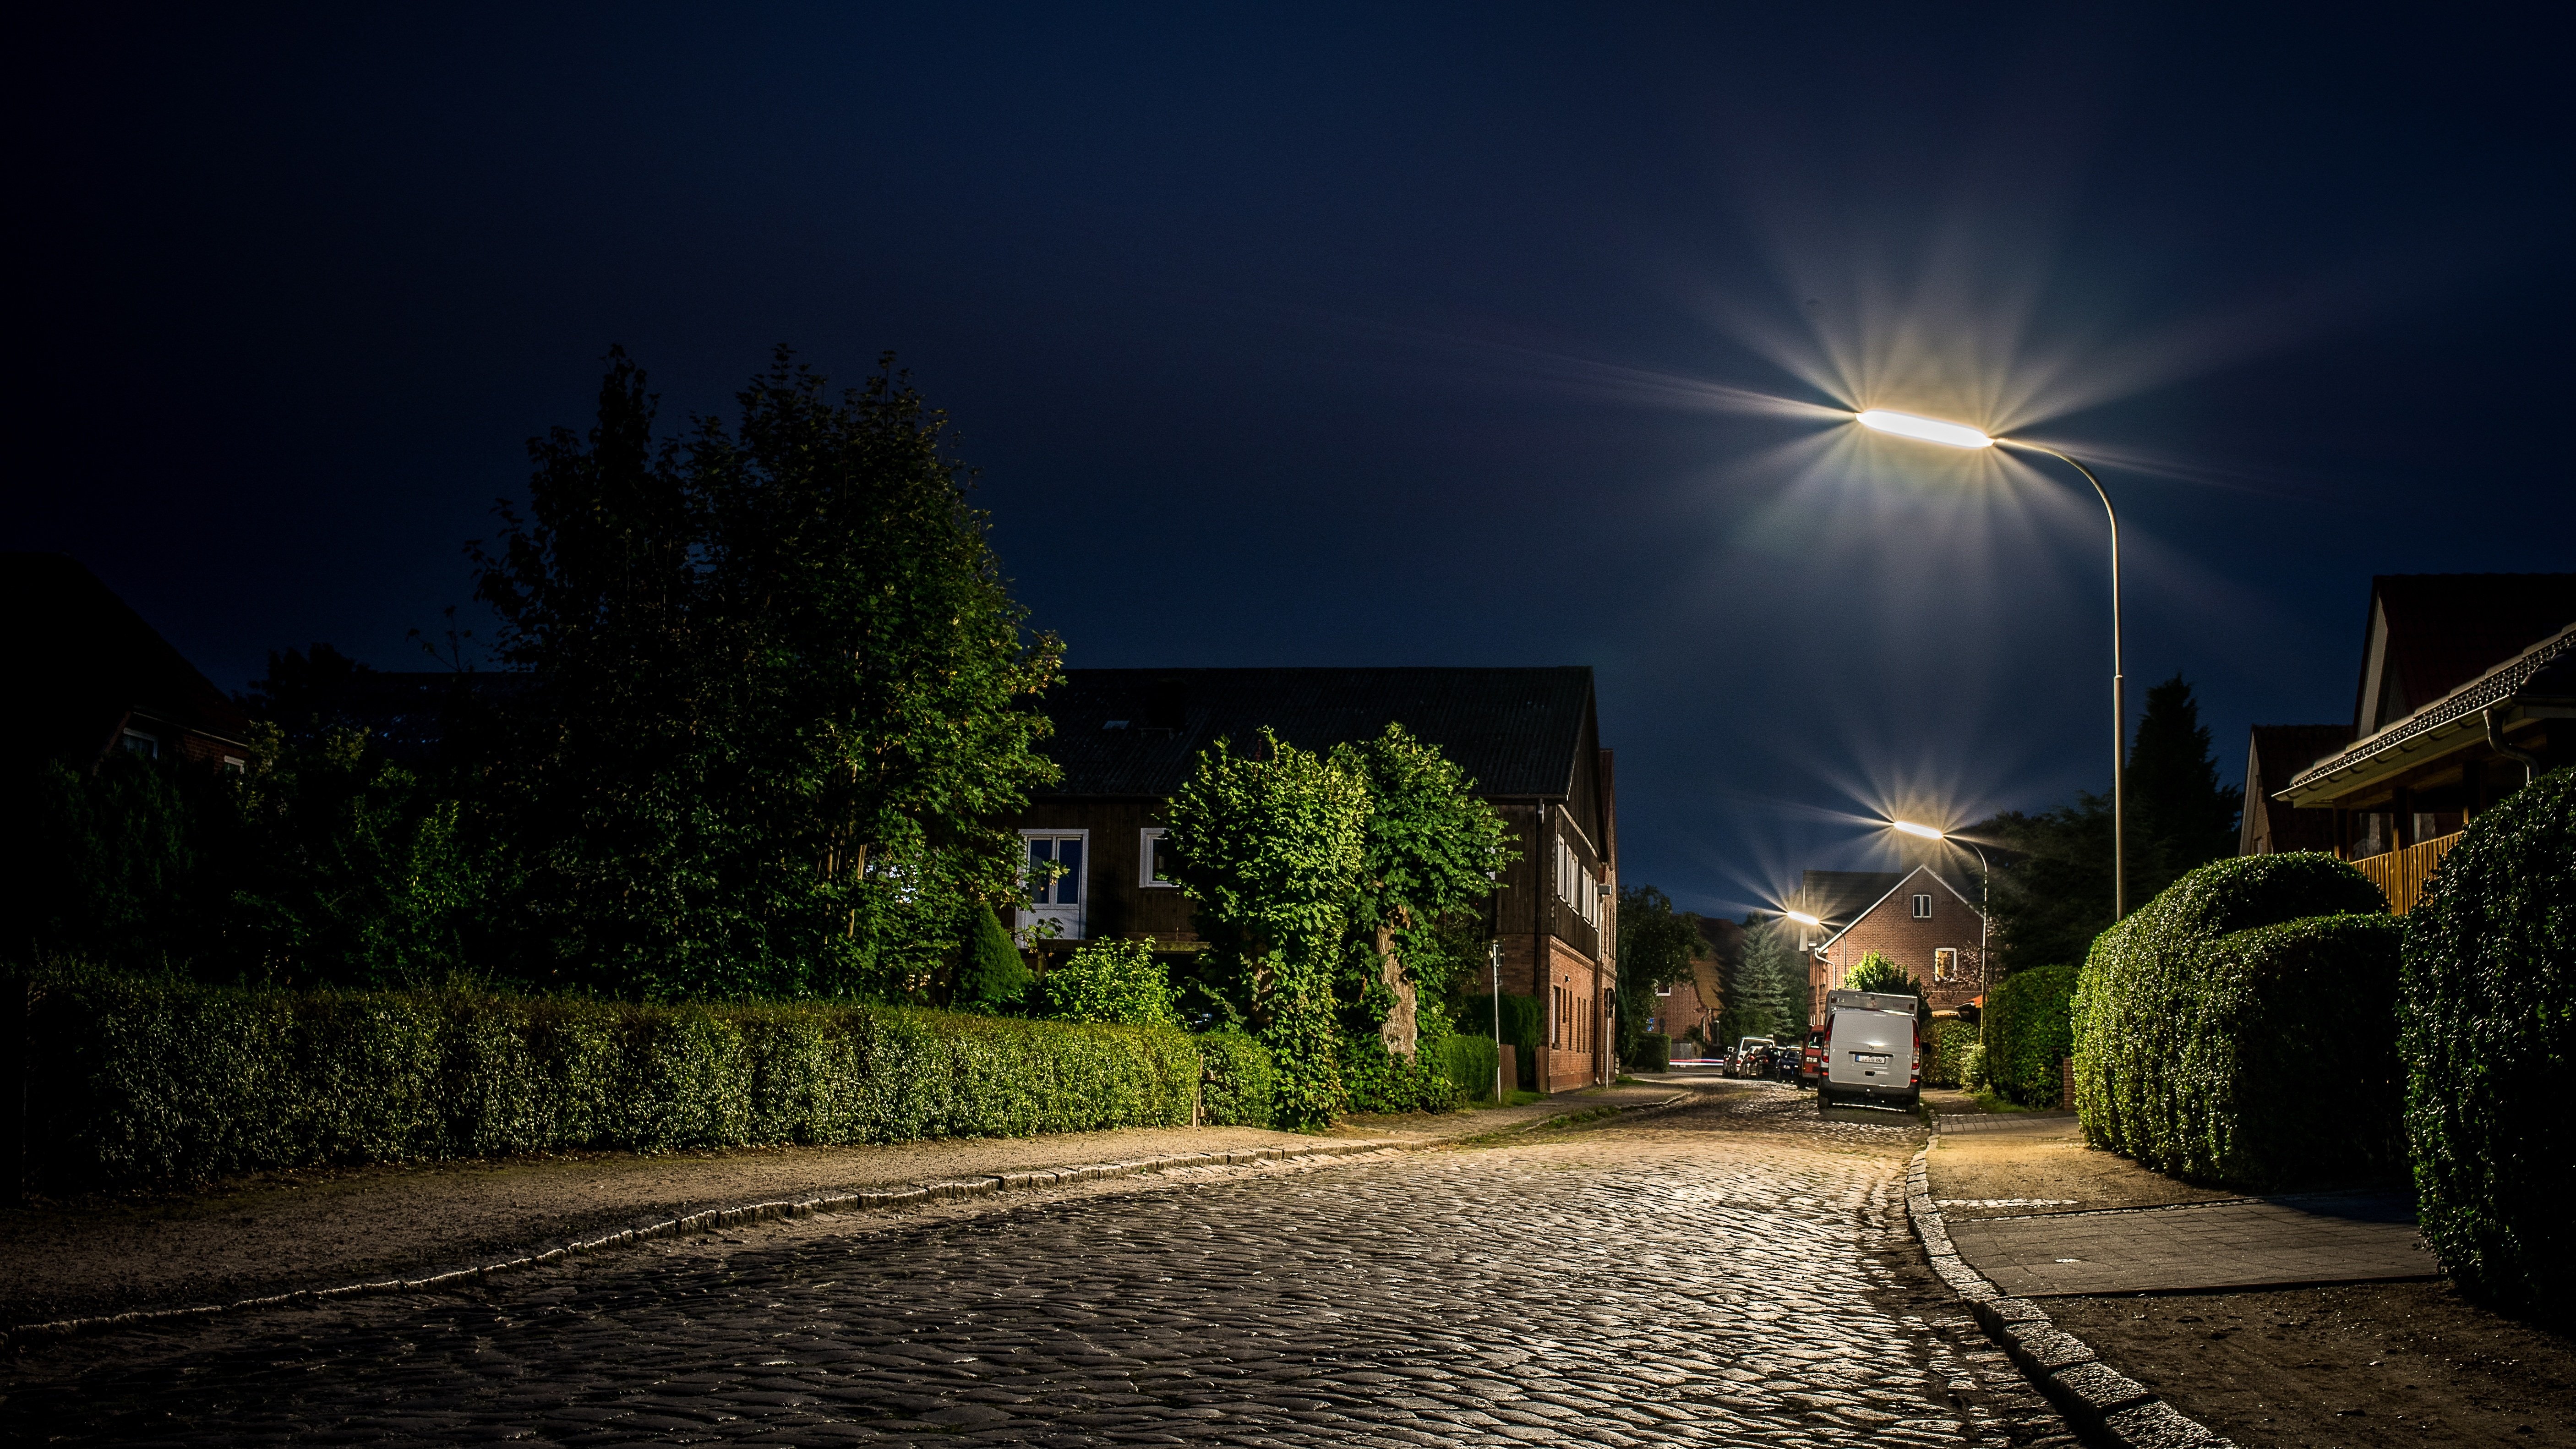 Street light illuminating houses and a cobbled street. 